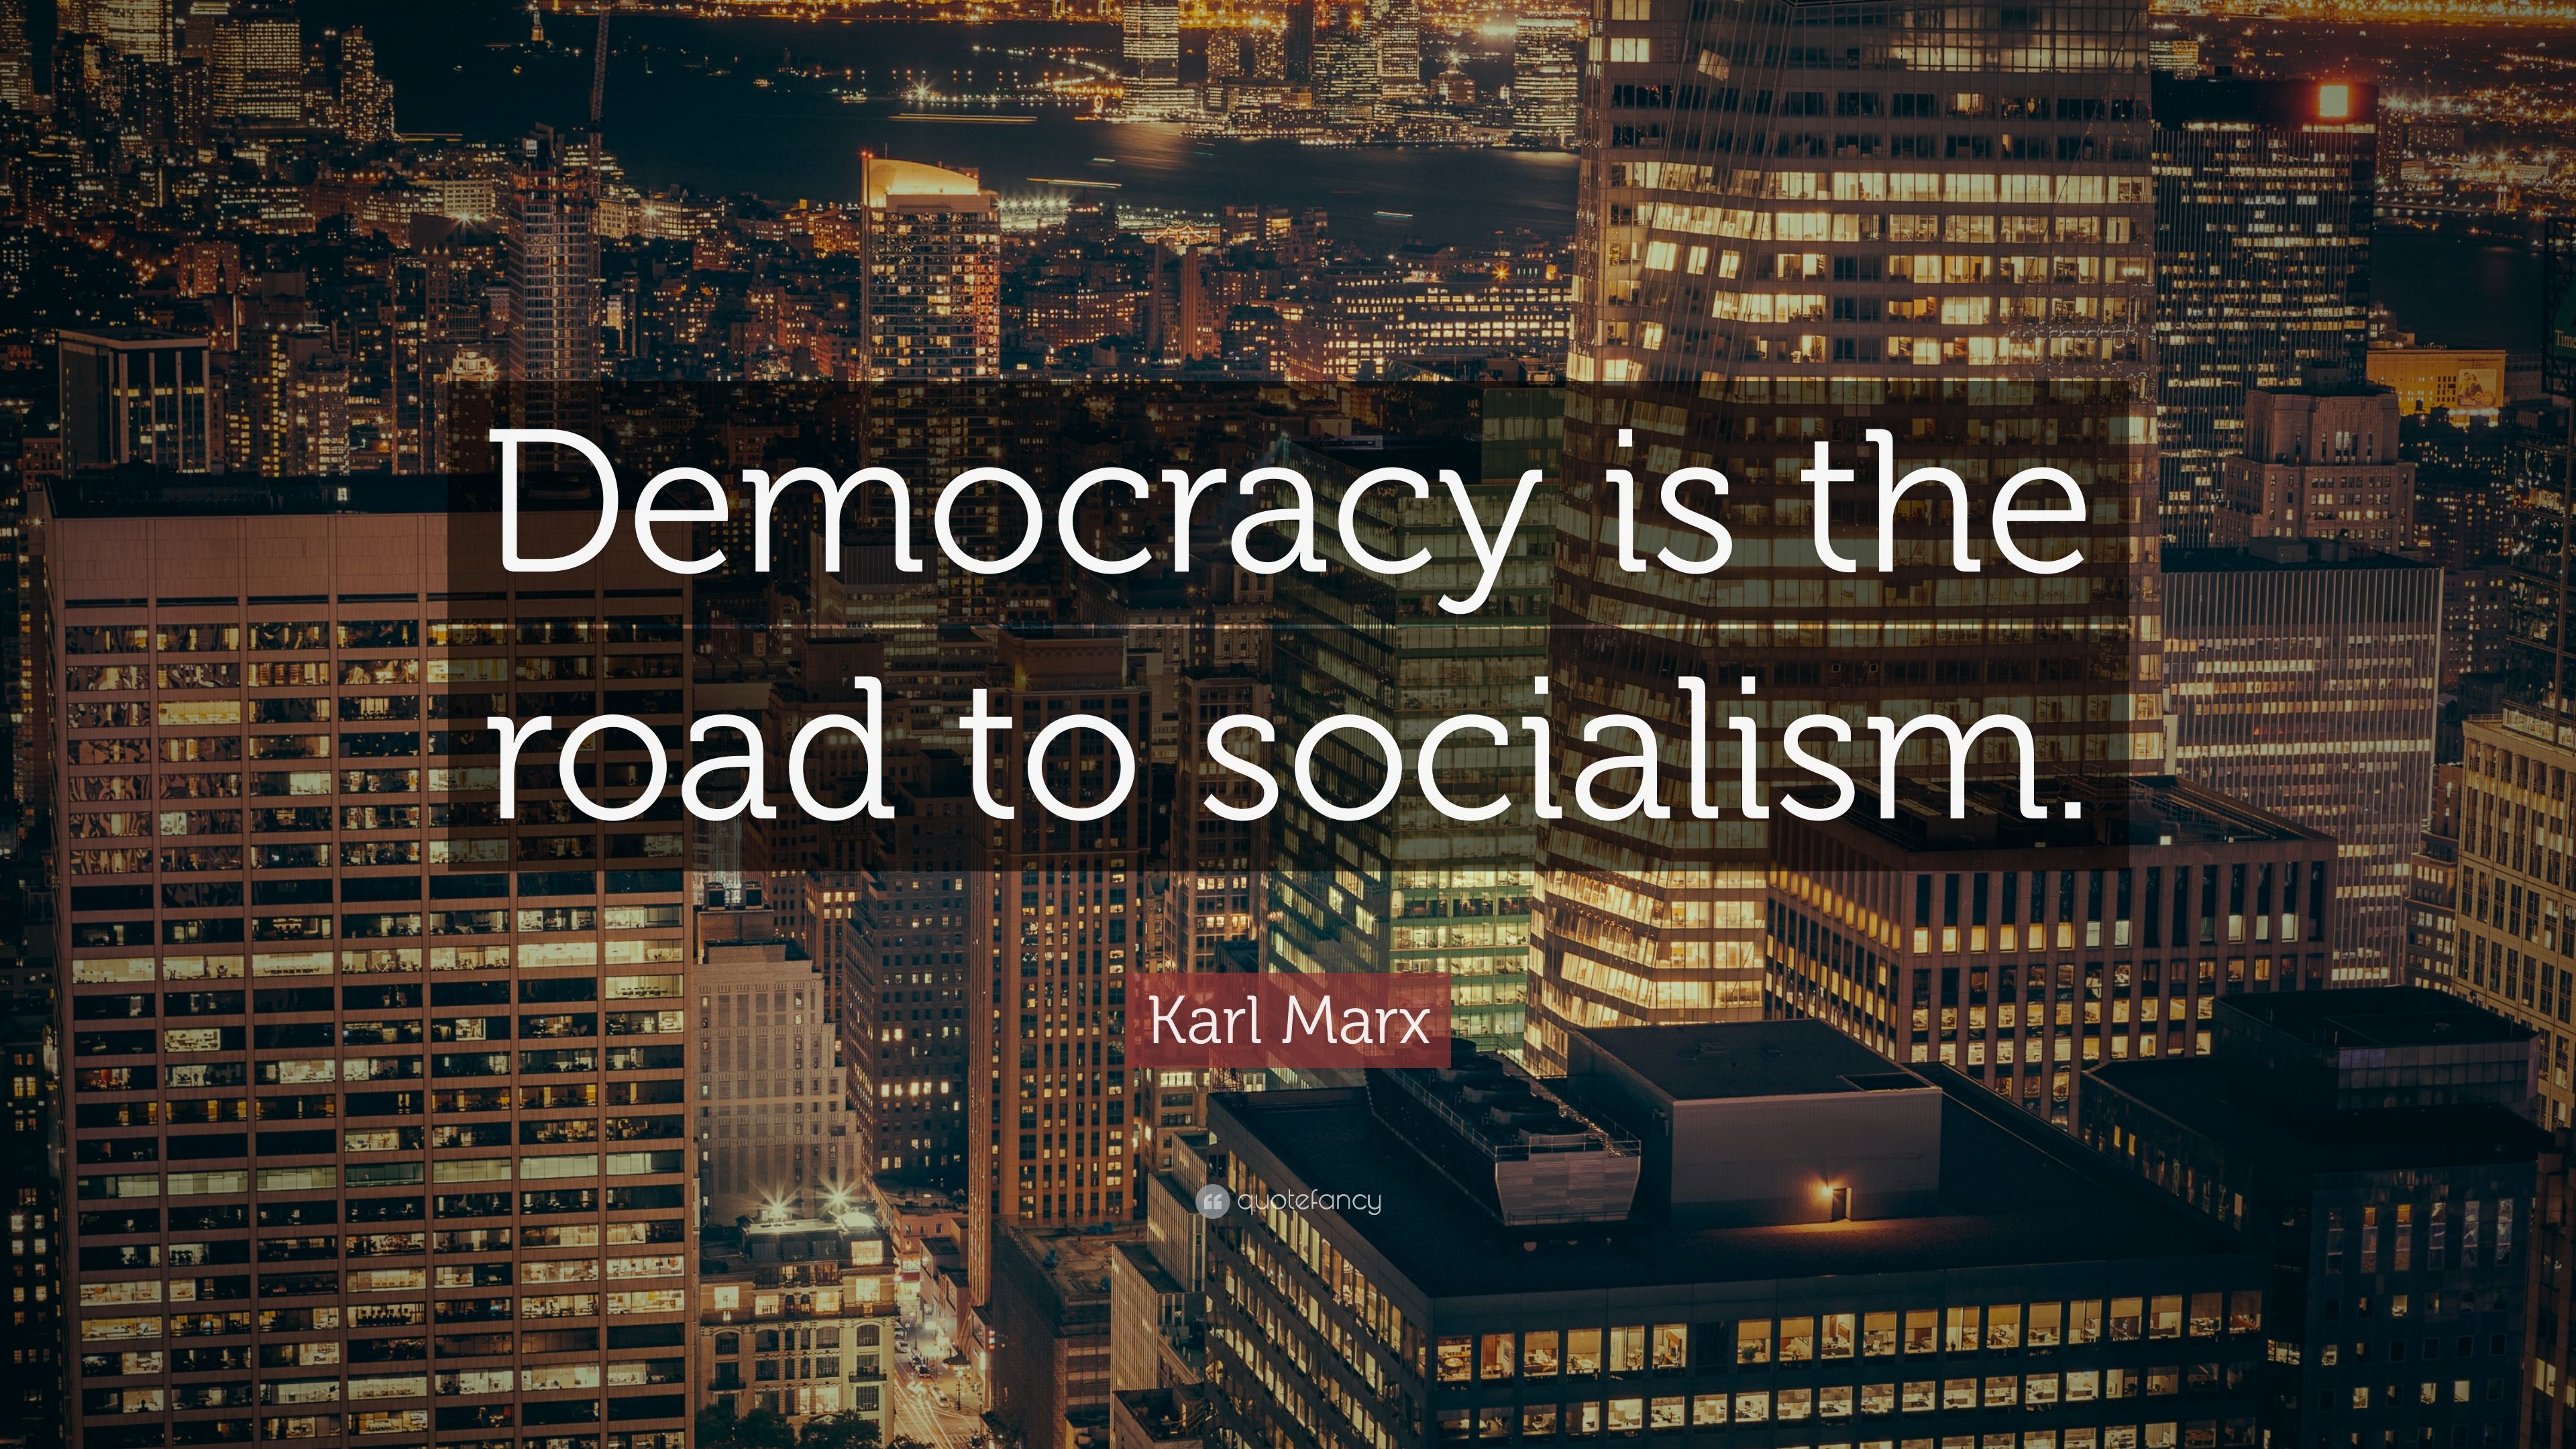 Karl Marx Quote: “Democracy is the road to socialism.” 17